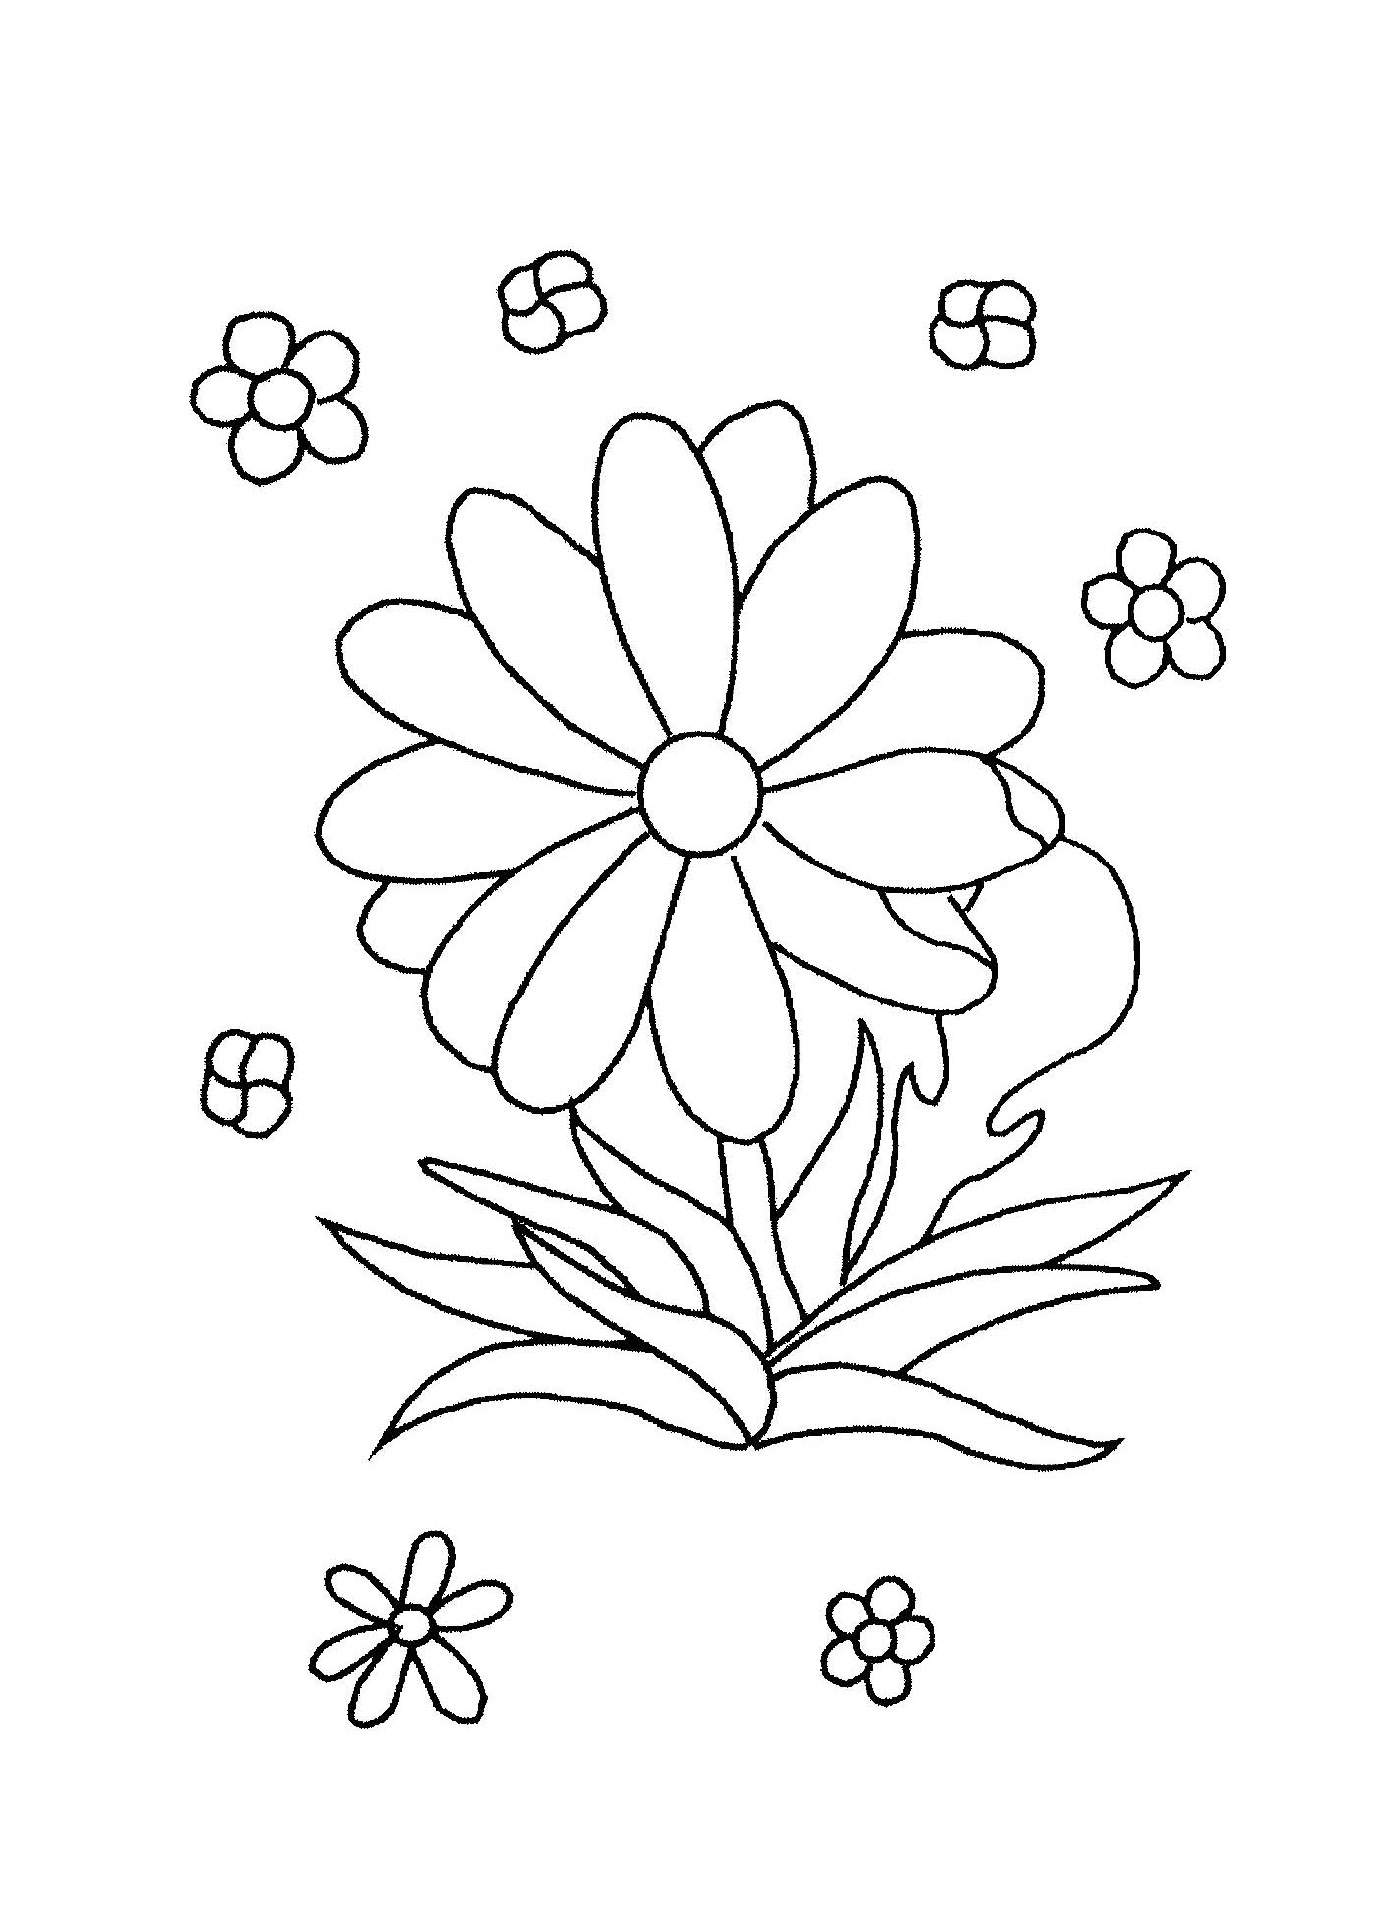  A simple and easy flower for children 